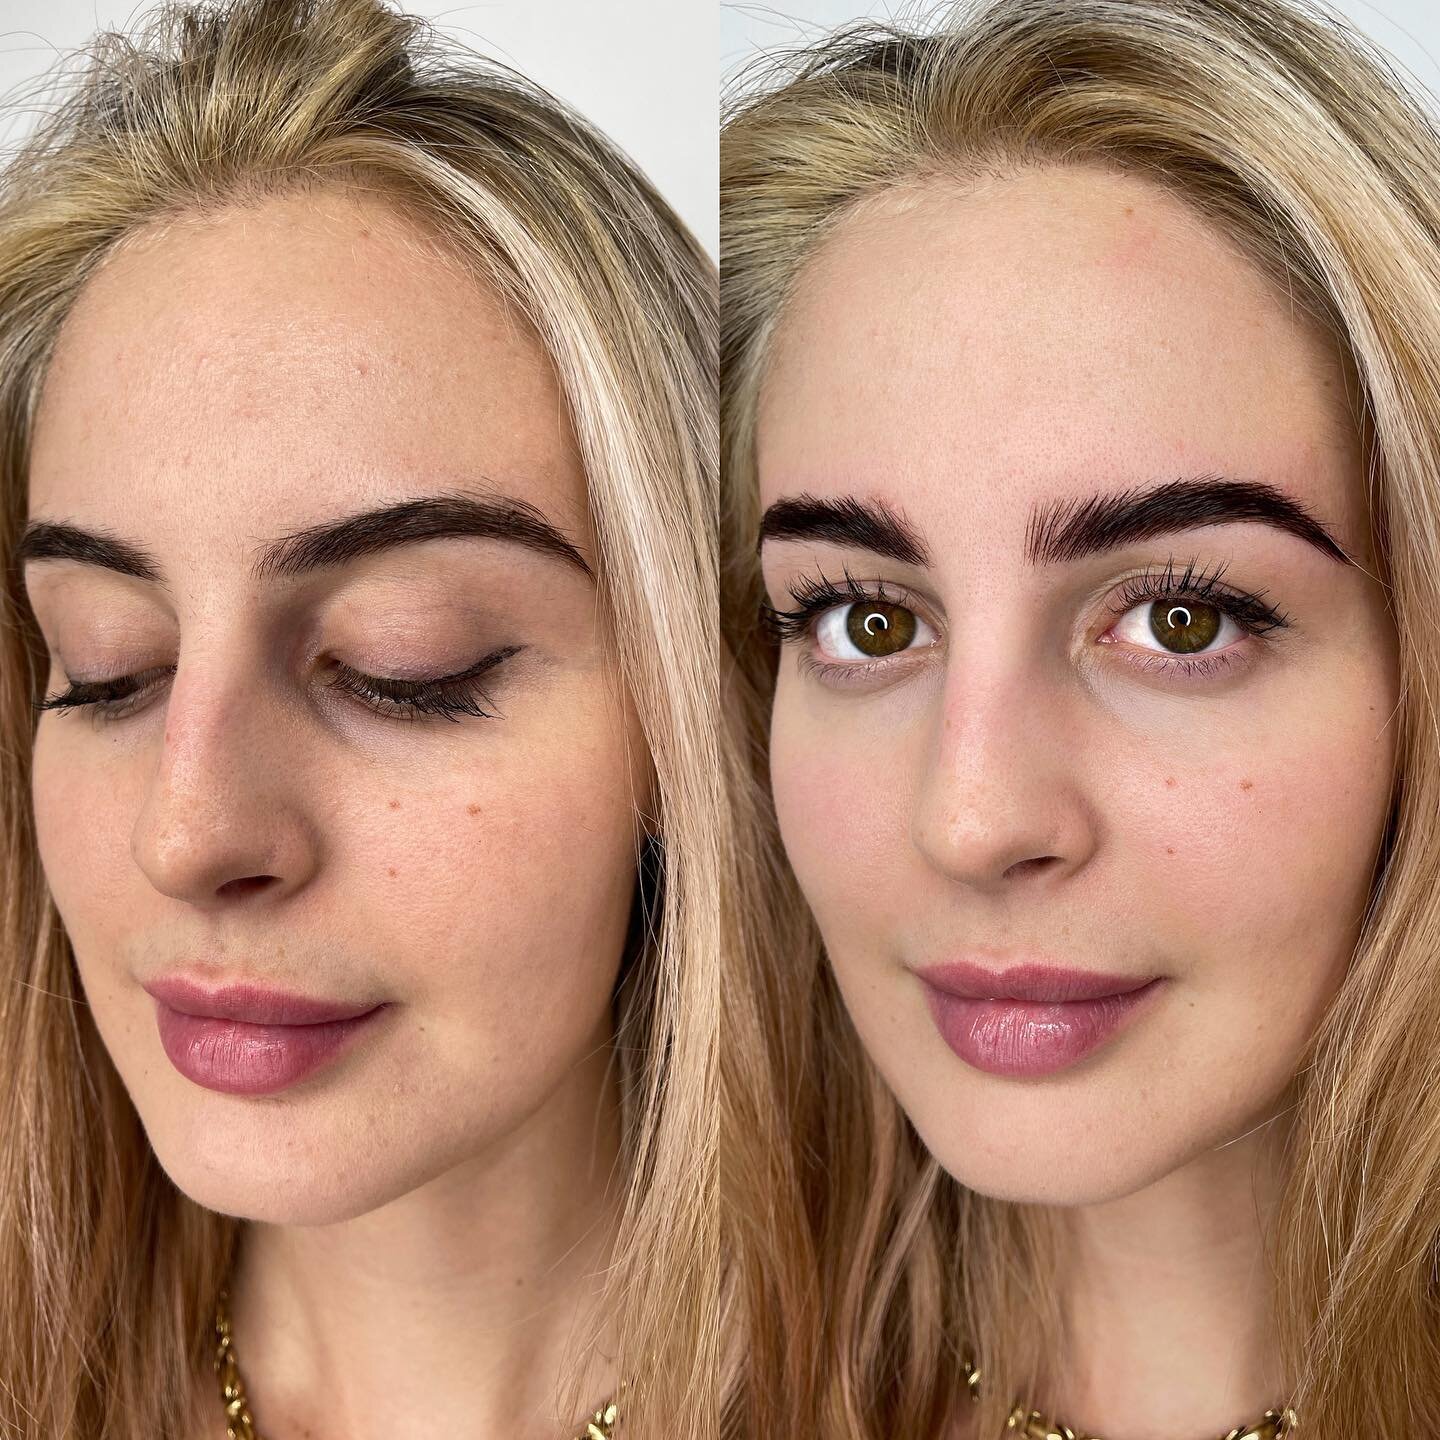 ✷Brow Lami✷ Unruly, coarse and stubborn brows can be styled fluffy and natural. 
Low maintenance brows all month🩷

*Brow Lamination is a straightening and softening treatment that makes the brow look fuller, fluffier and easier to style.
🌱Plant ext